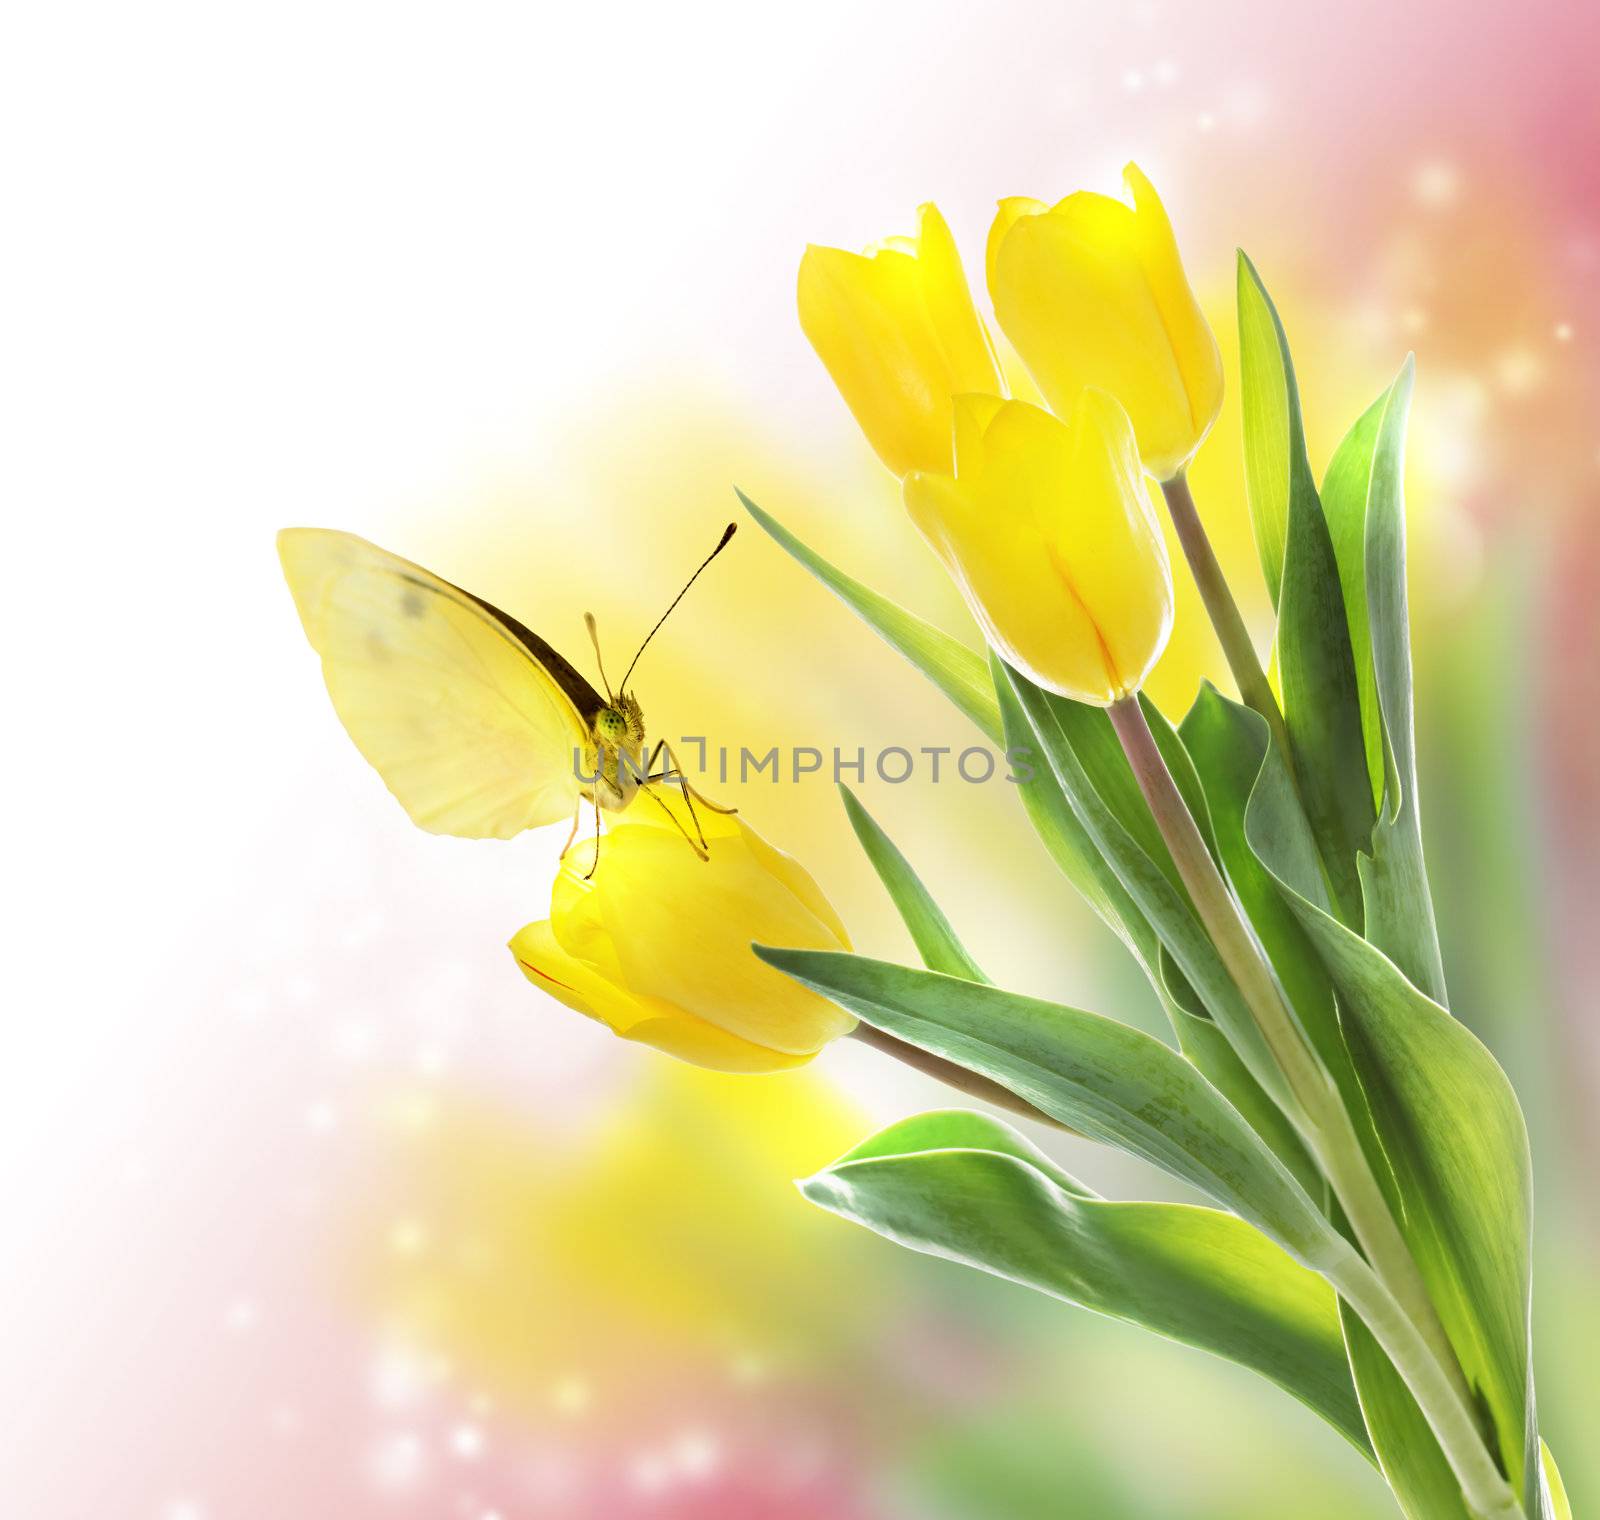 Yellow Tulips with a Butterfly by melpomene